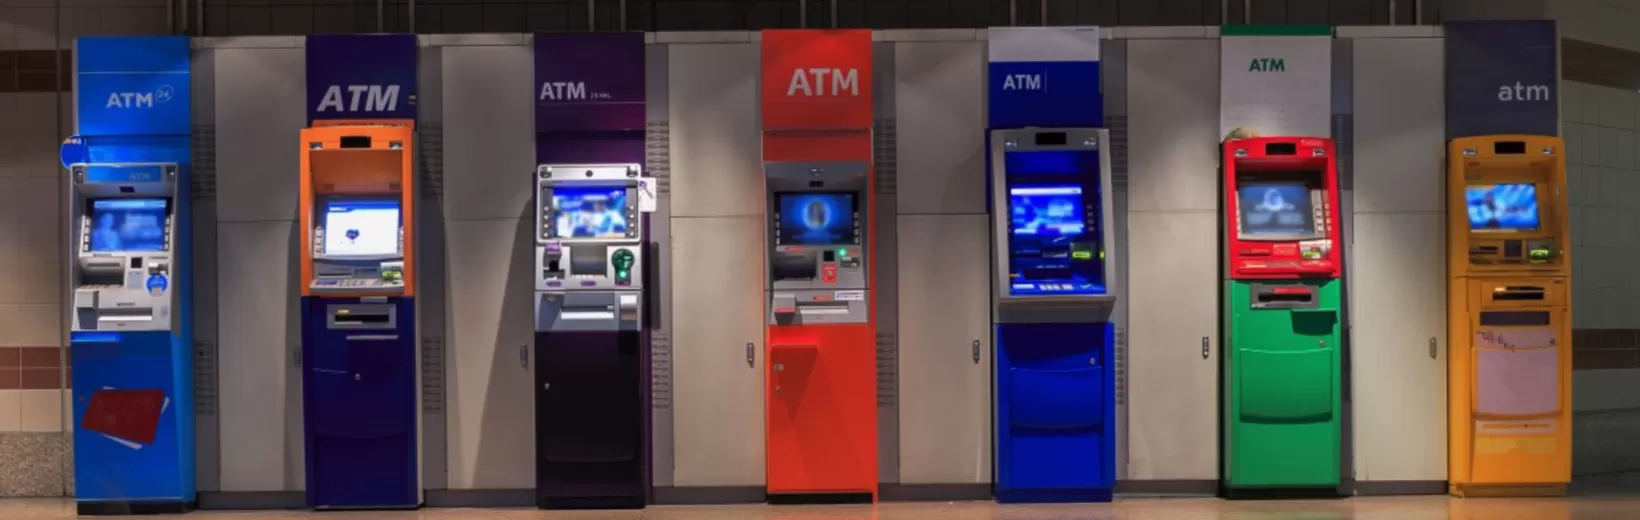 Bank of ATM machines in a train station